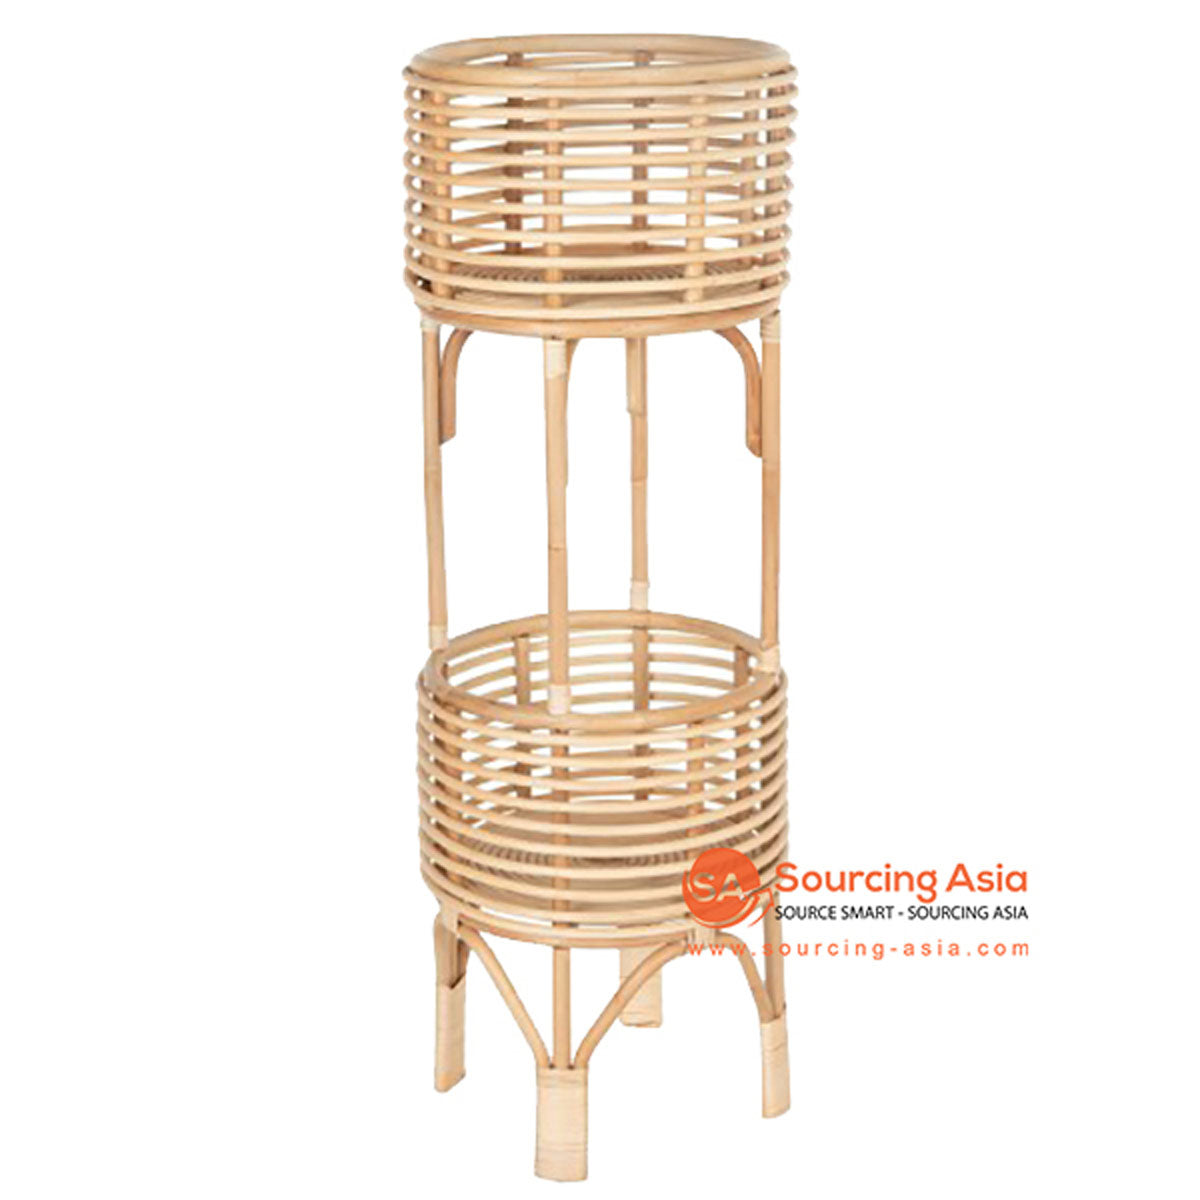 SHL089 NATURAL RATTAN ROUND DOUBLE PLANTERS